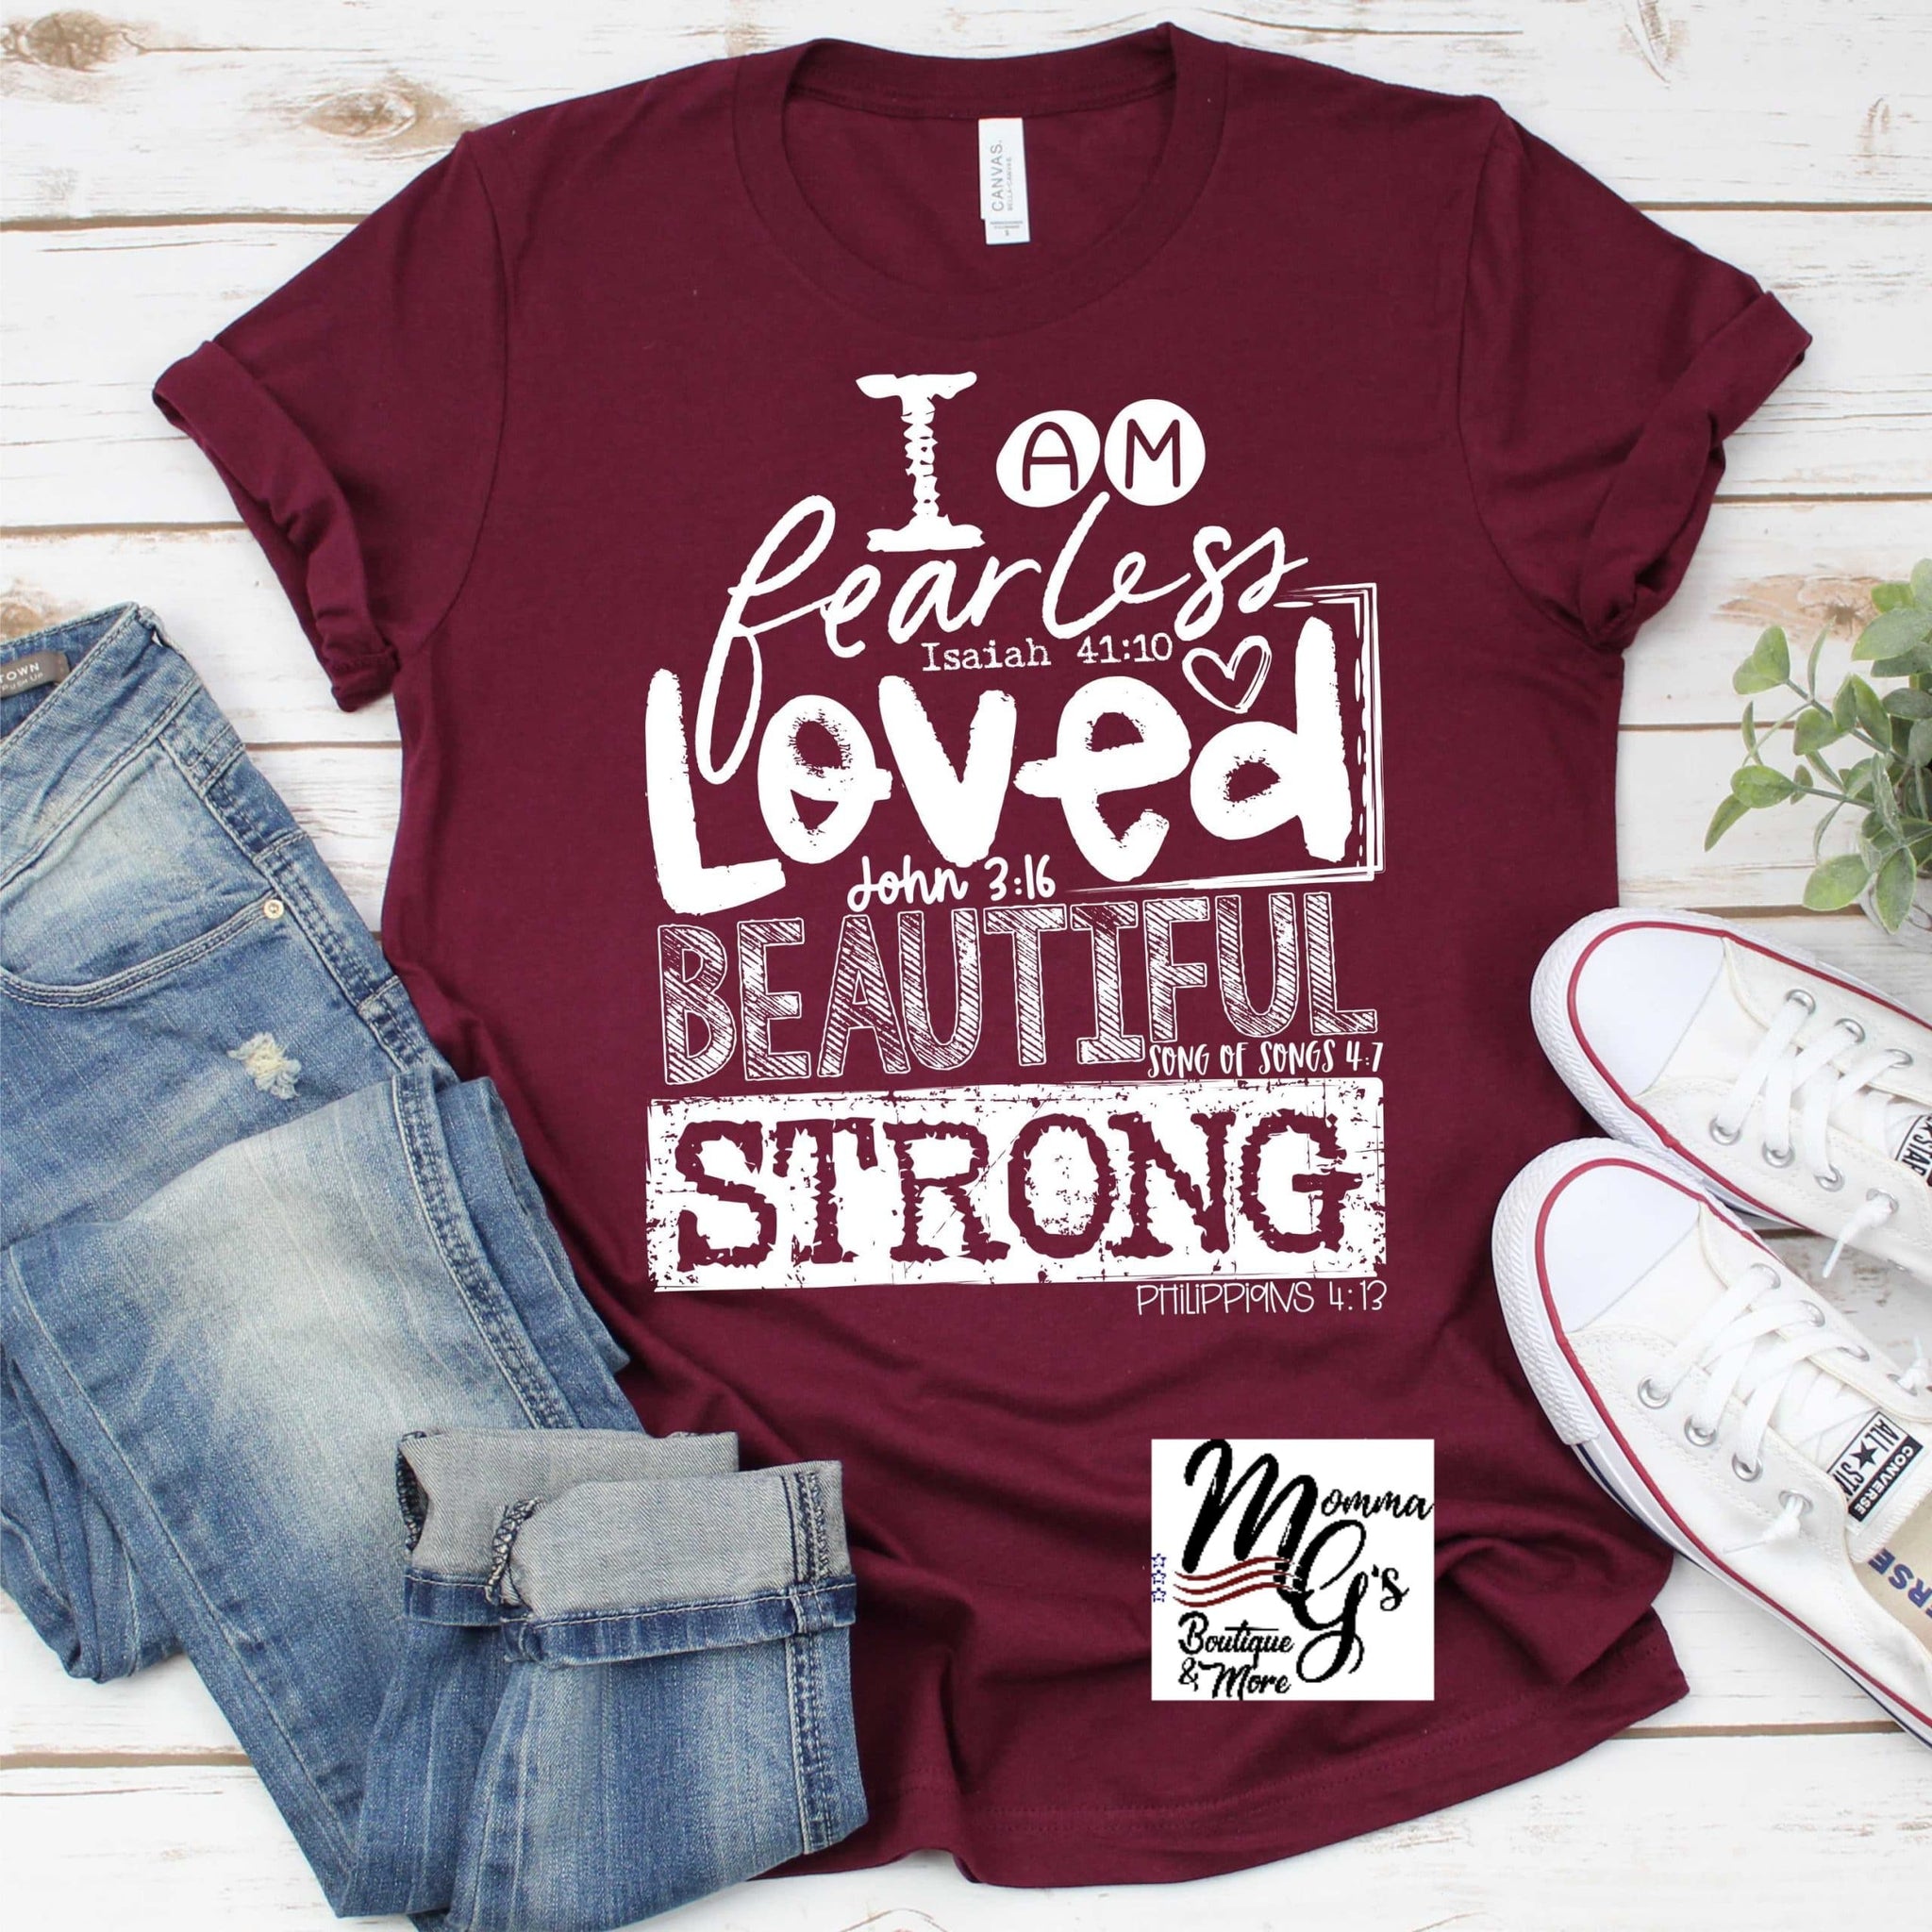 I am fearless loved beautiful and strong t-shirt